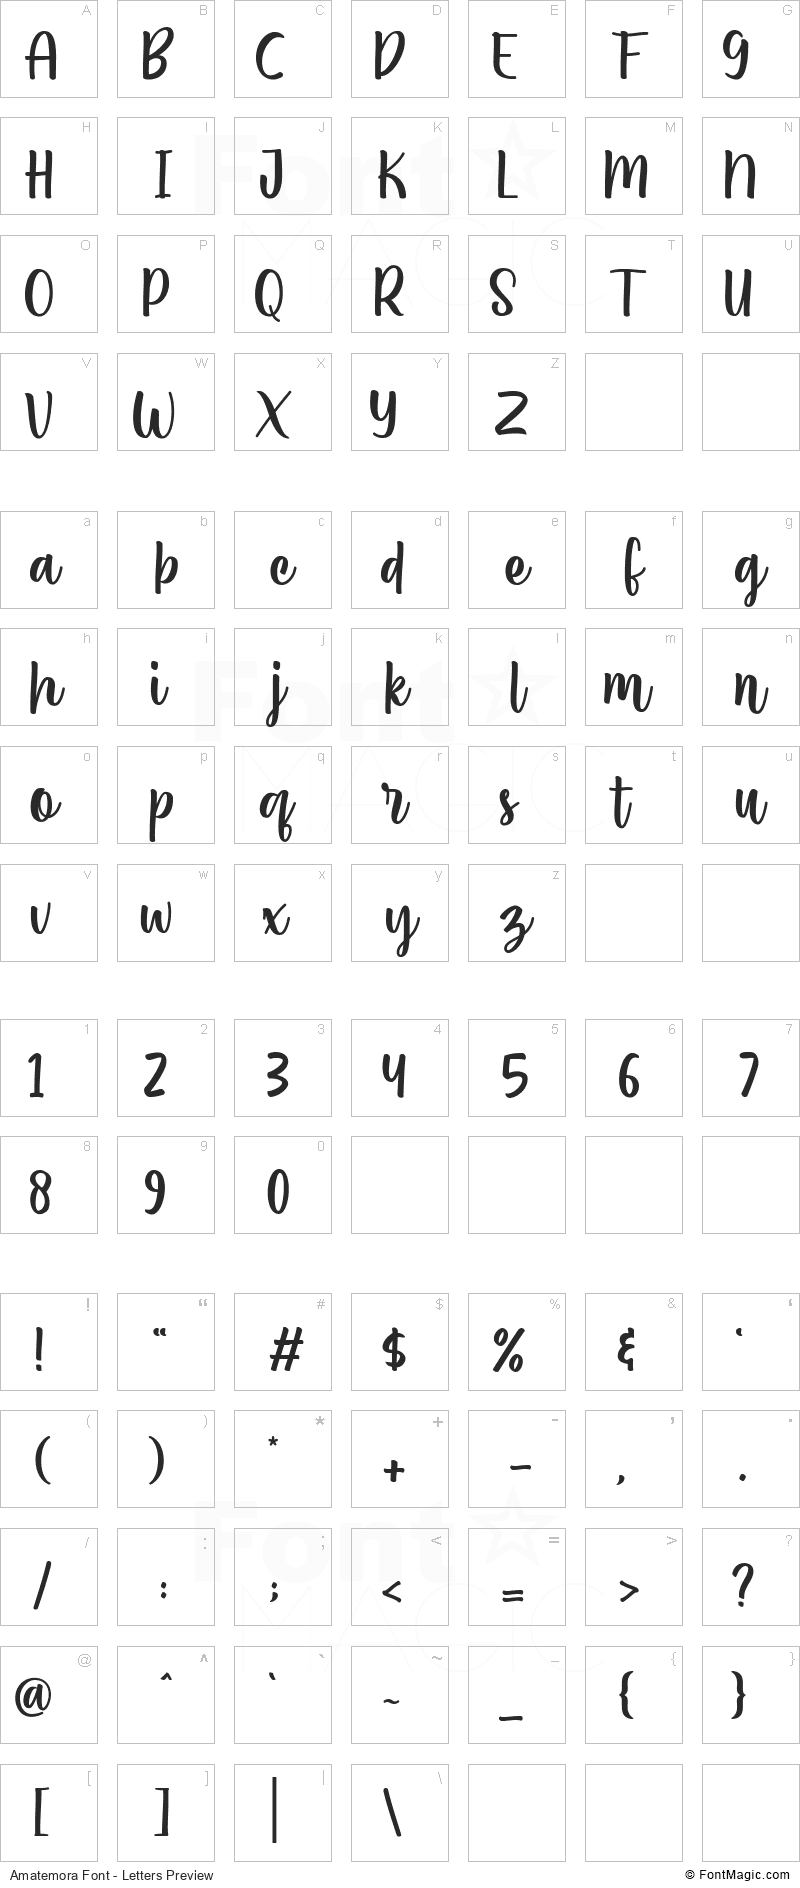 Amatemora Font - All Latters Preview Chart